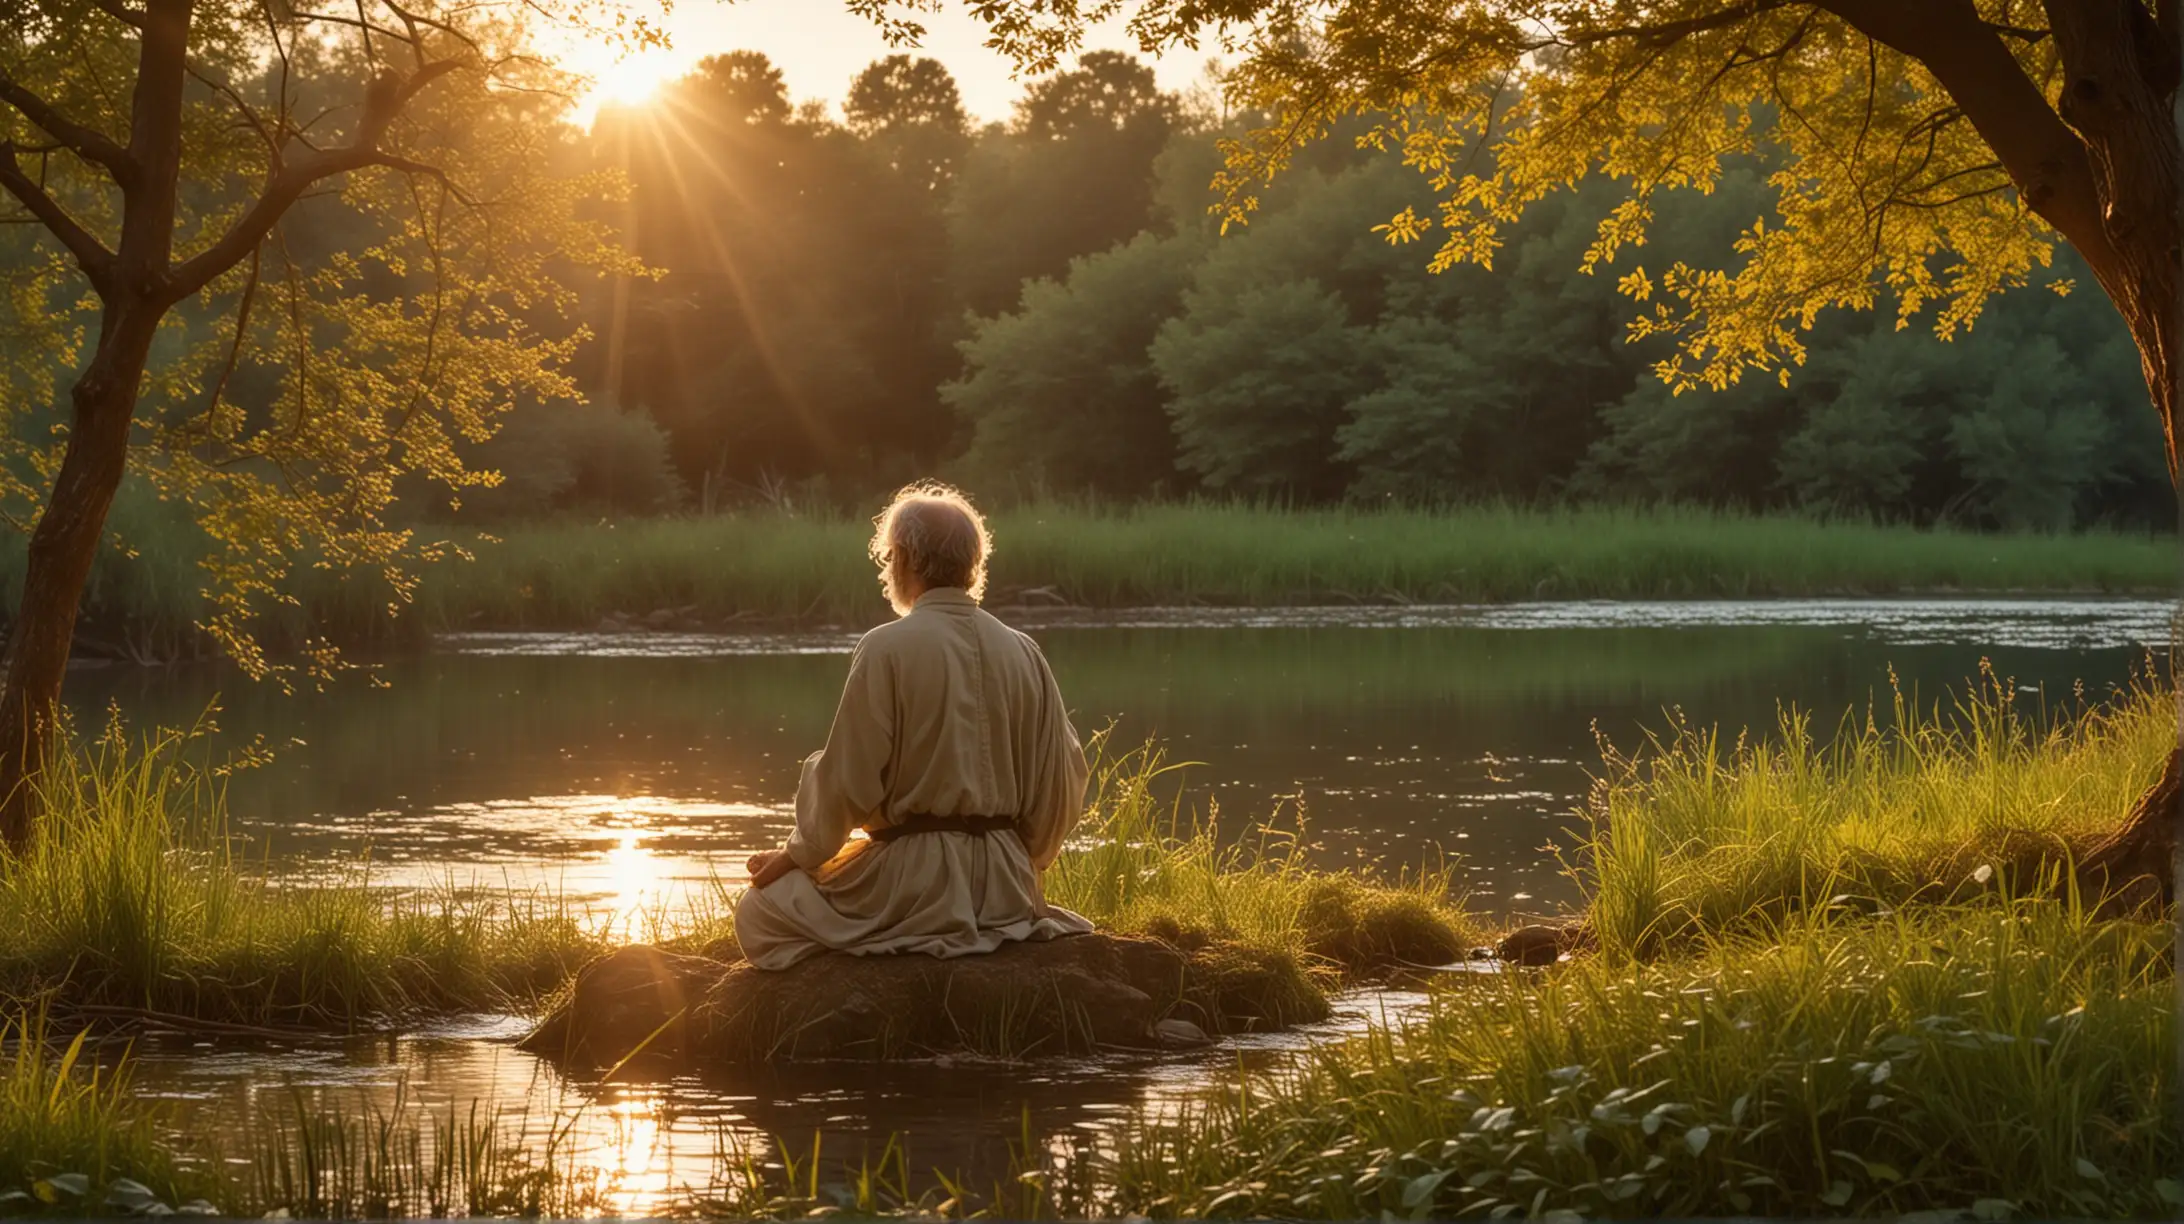 General Visualization: Create an image of a stoic philosopher meditating by a tranquil river, with the golden glow of the setting sun casting a warm light over the scene.
Image Description: In the image, a stoic philosopher sits cross-legged on the grassy bank of a gently flowing river. His eyes are closed in deep concentration, as he practices mindfulness and introspection. The soft hues of the evening sky and the gentle rustle of leaves create a peaceful atmosphere conducive to reflection and inner peace.